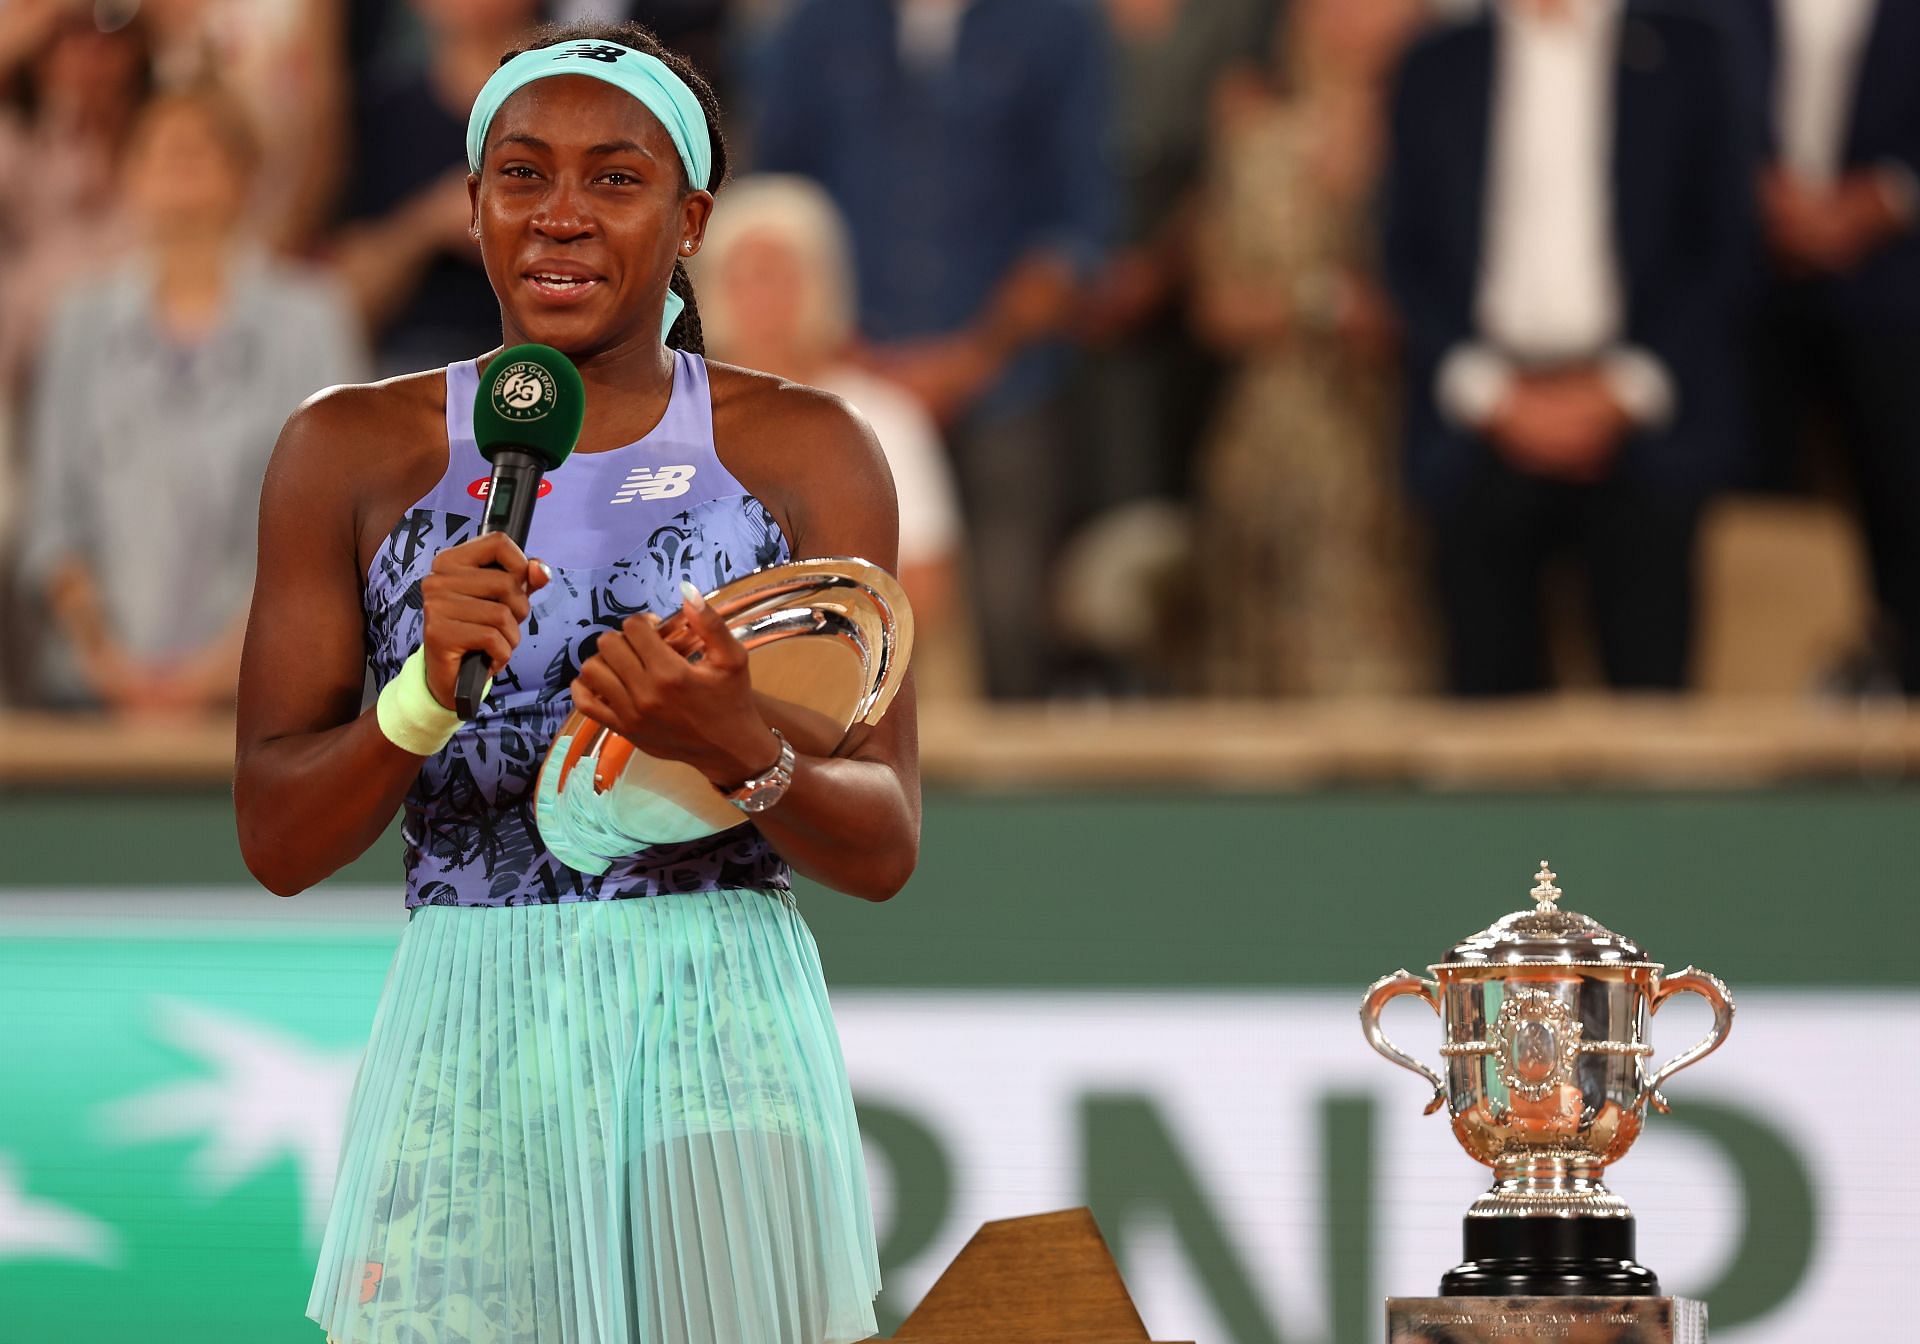 Coco Gauff is the French Open defending finalist